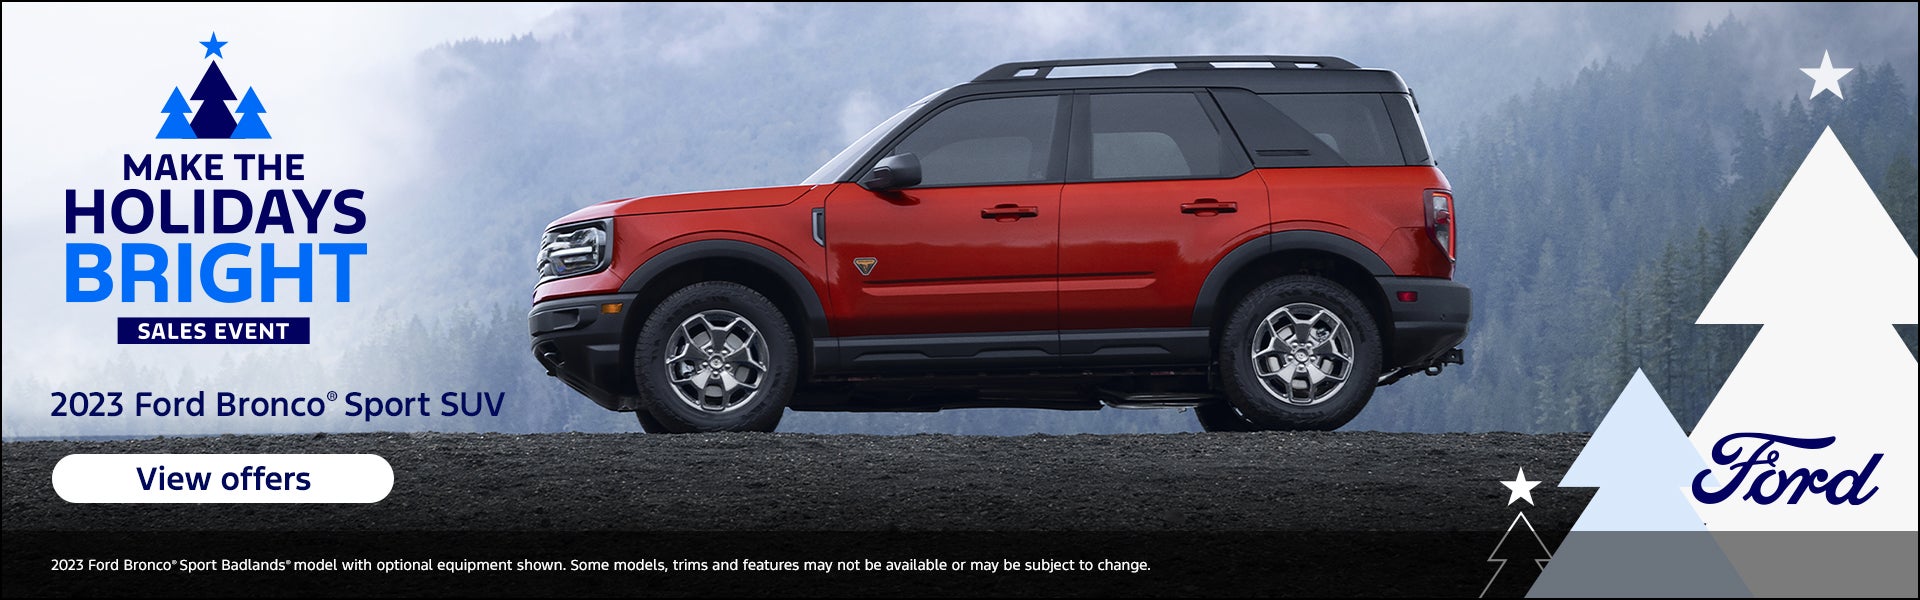 Holiday sales event 2023 ford bronco sport